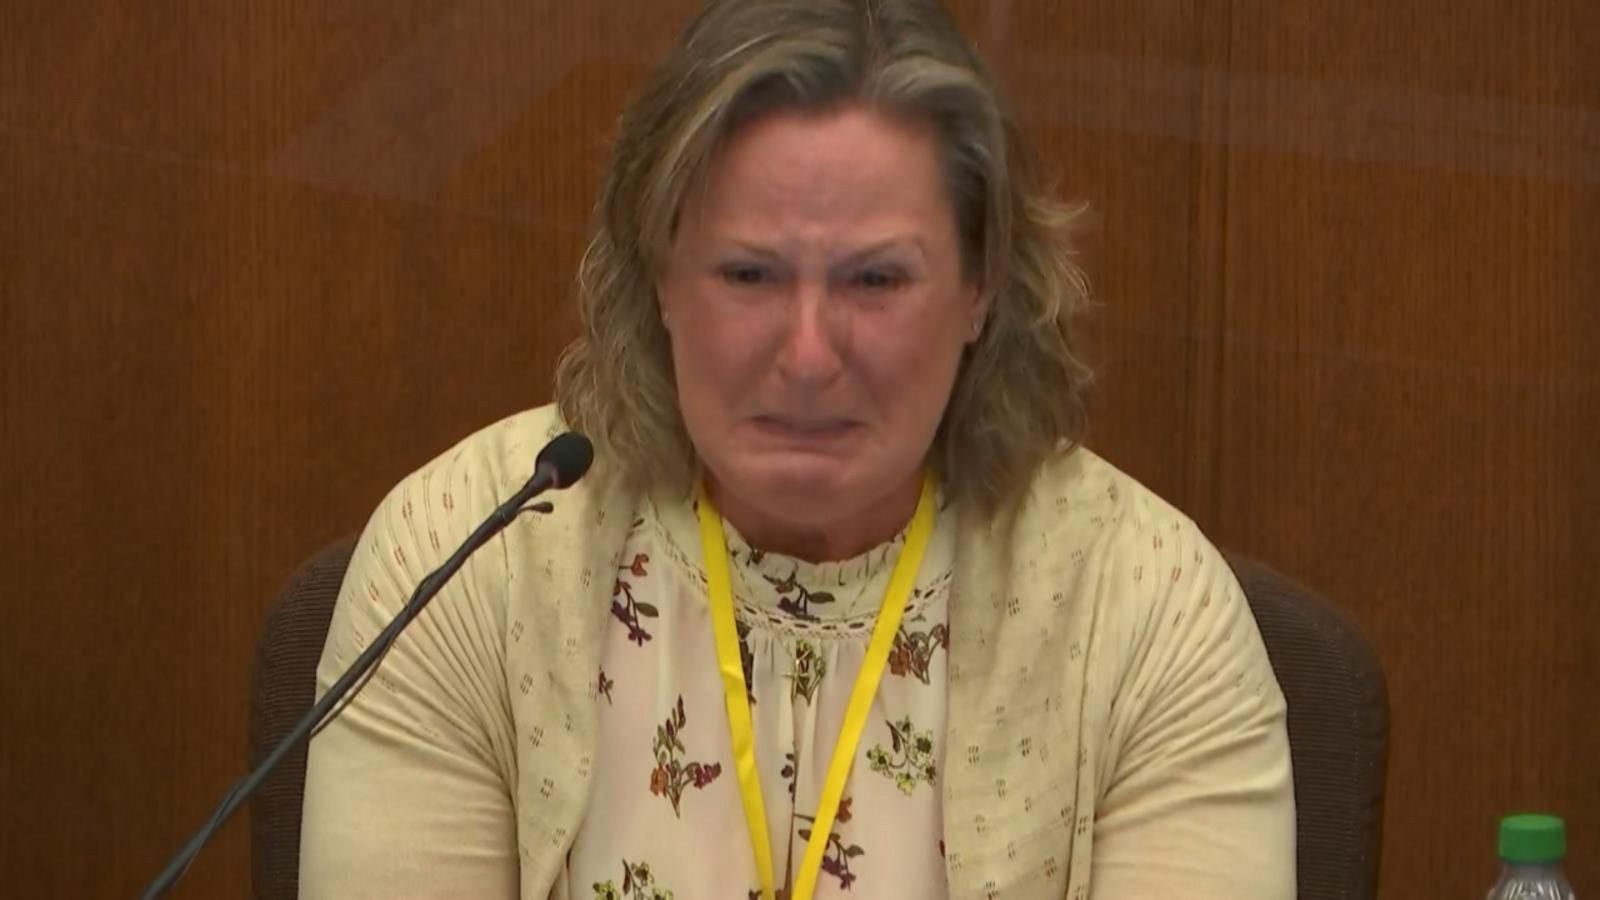 Former police officer Kim Potter takes the stand in her own defense ...